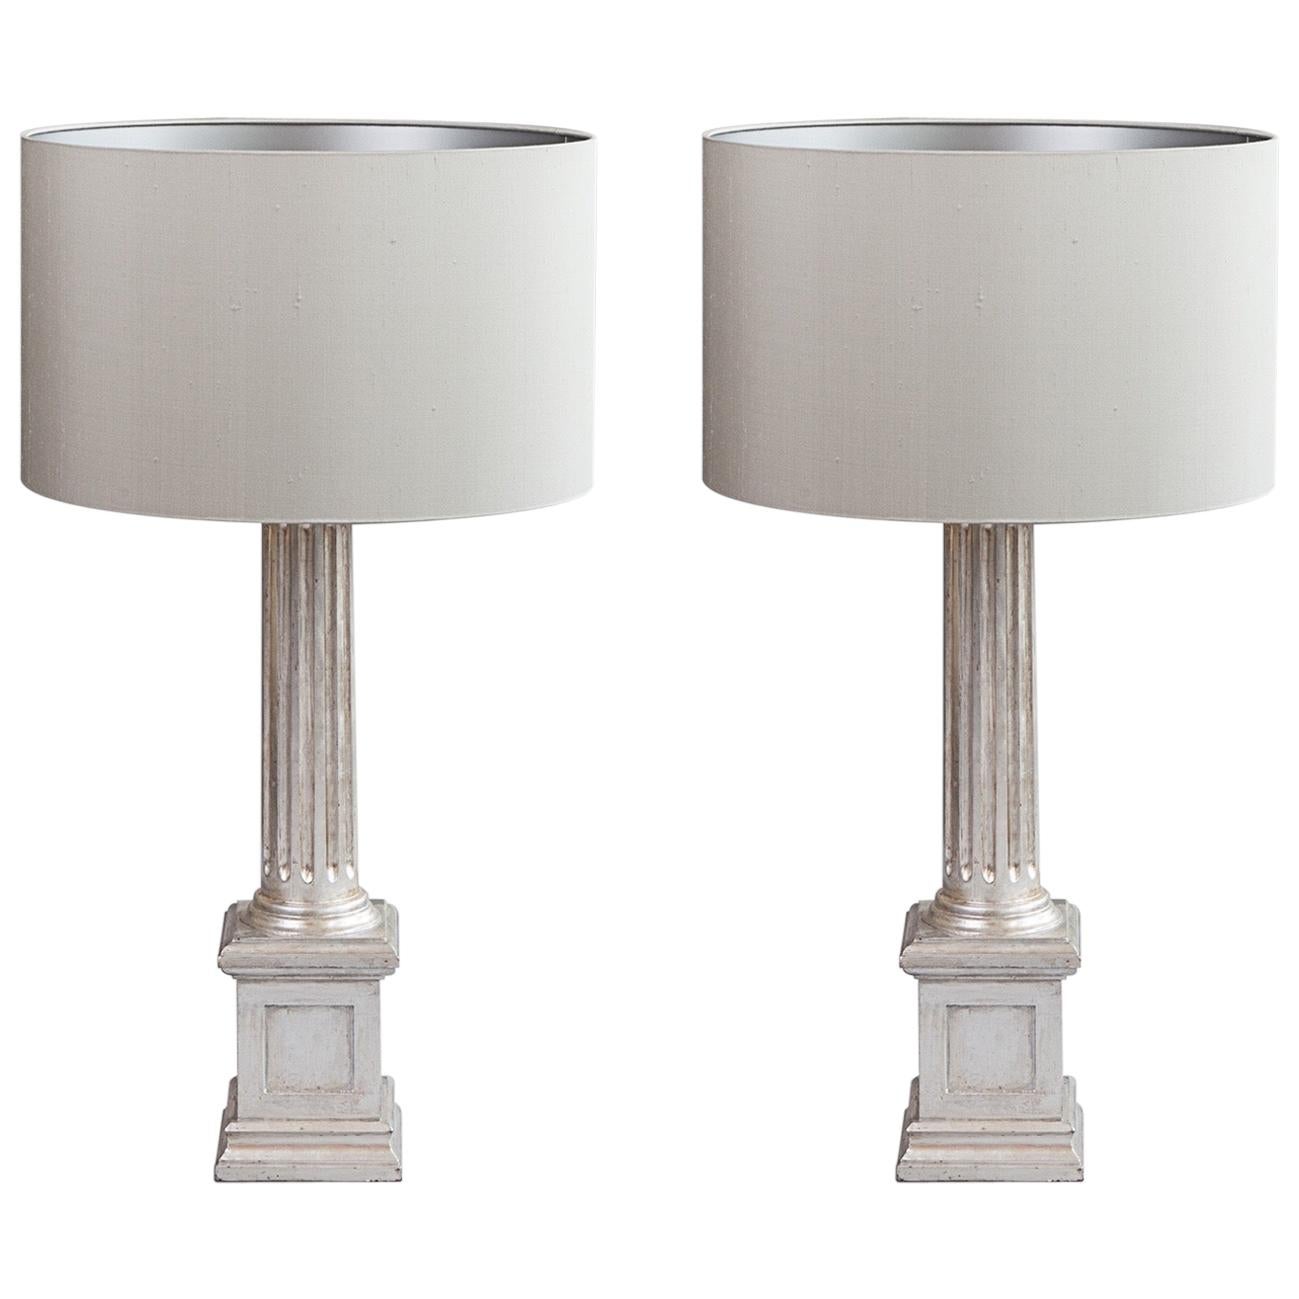 Pair of Carved and silver Painted Wood Column Table Lamps